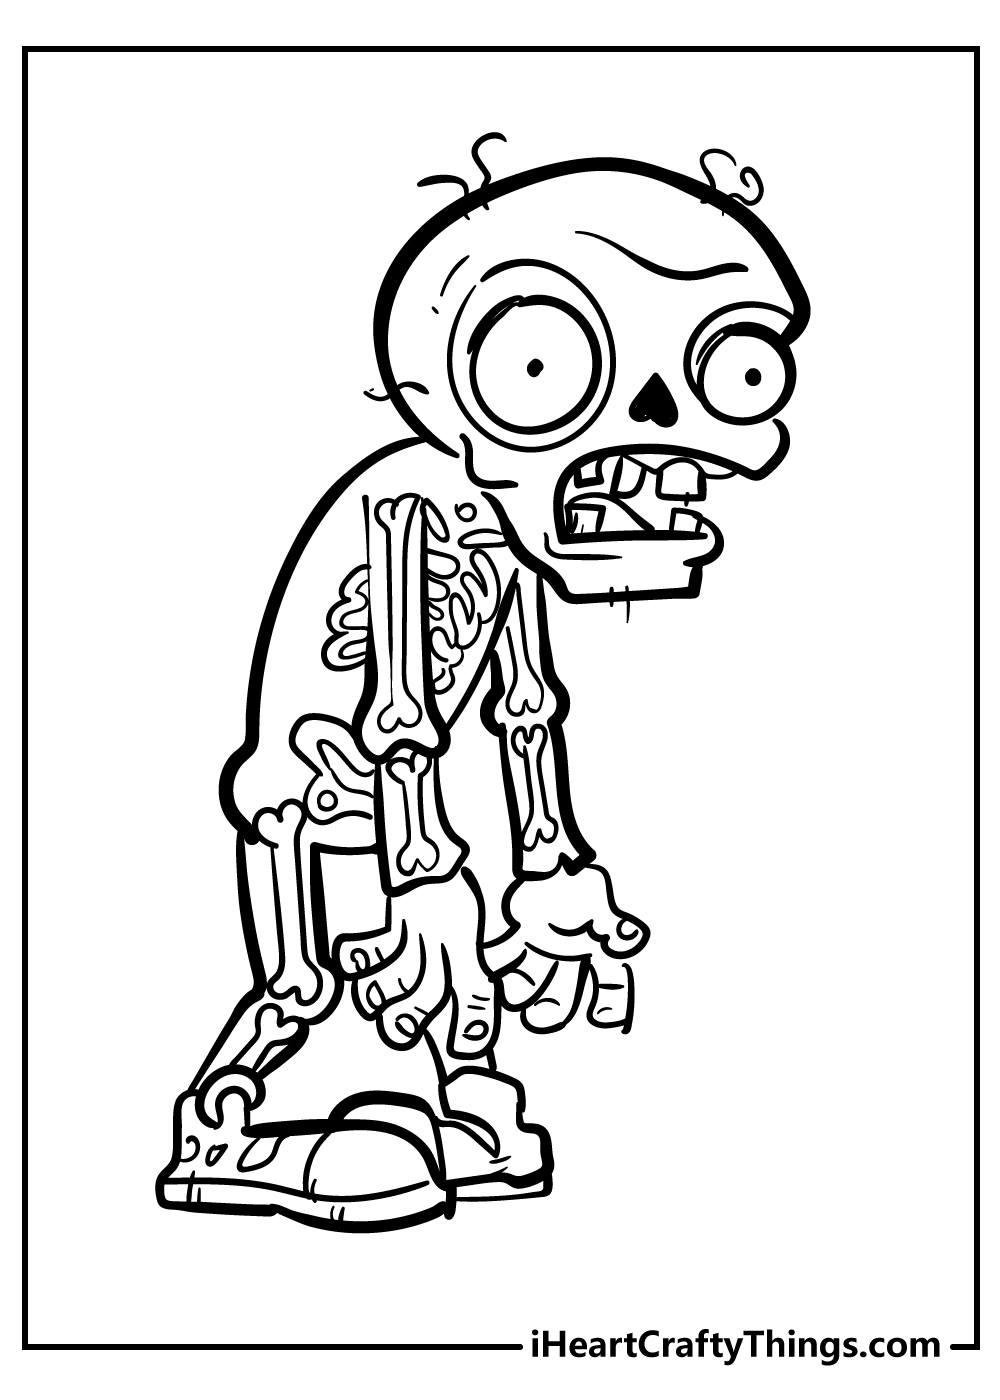 Plants Vs. Zombies Coloring Pages free pdf download